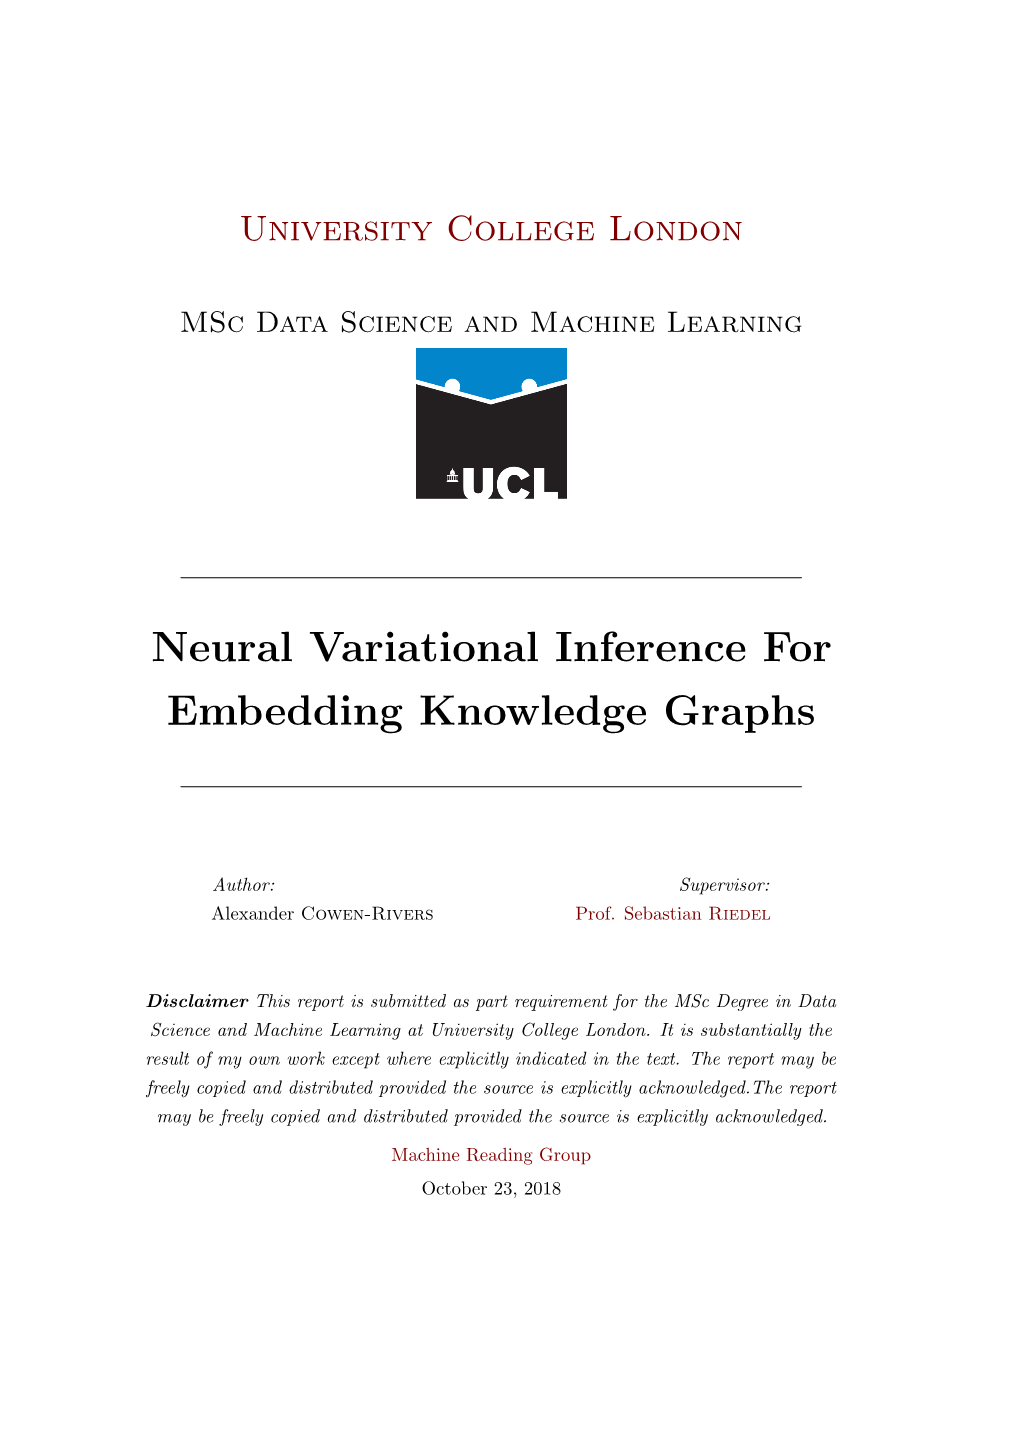 Neural Variational Inference for Embedding Knowledge Graphs